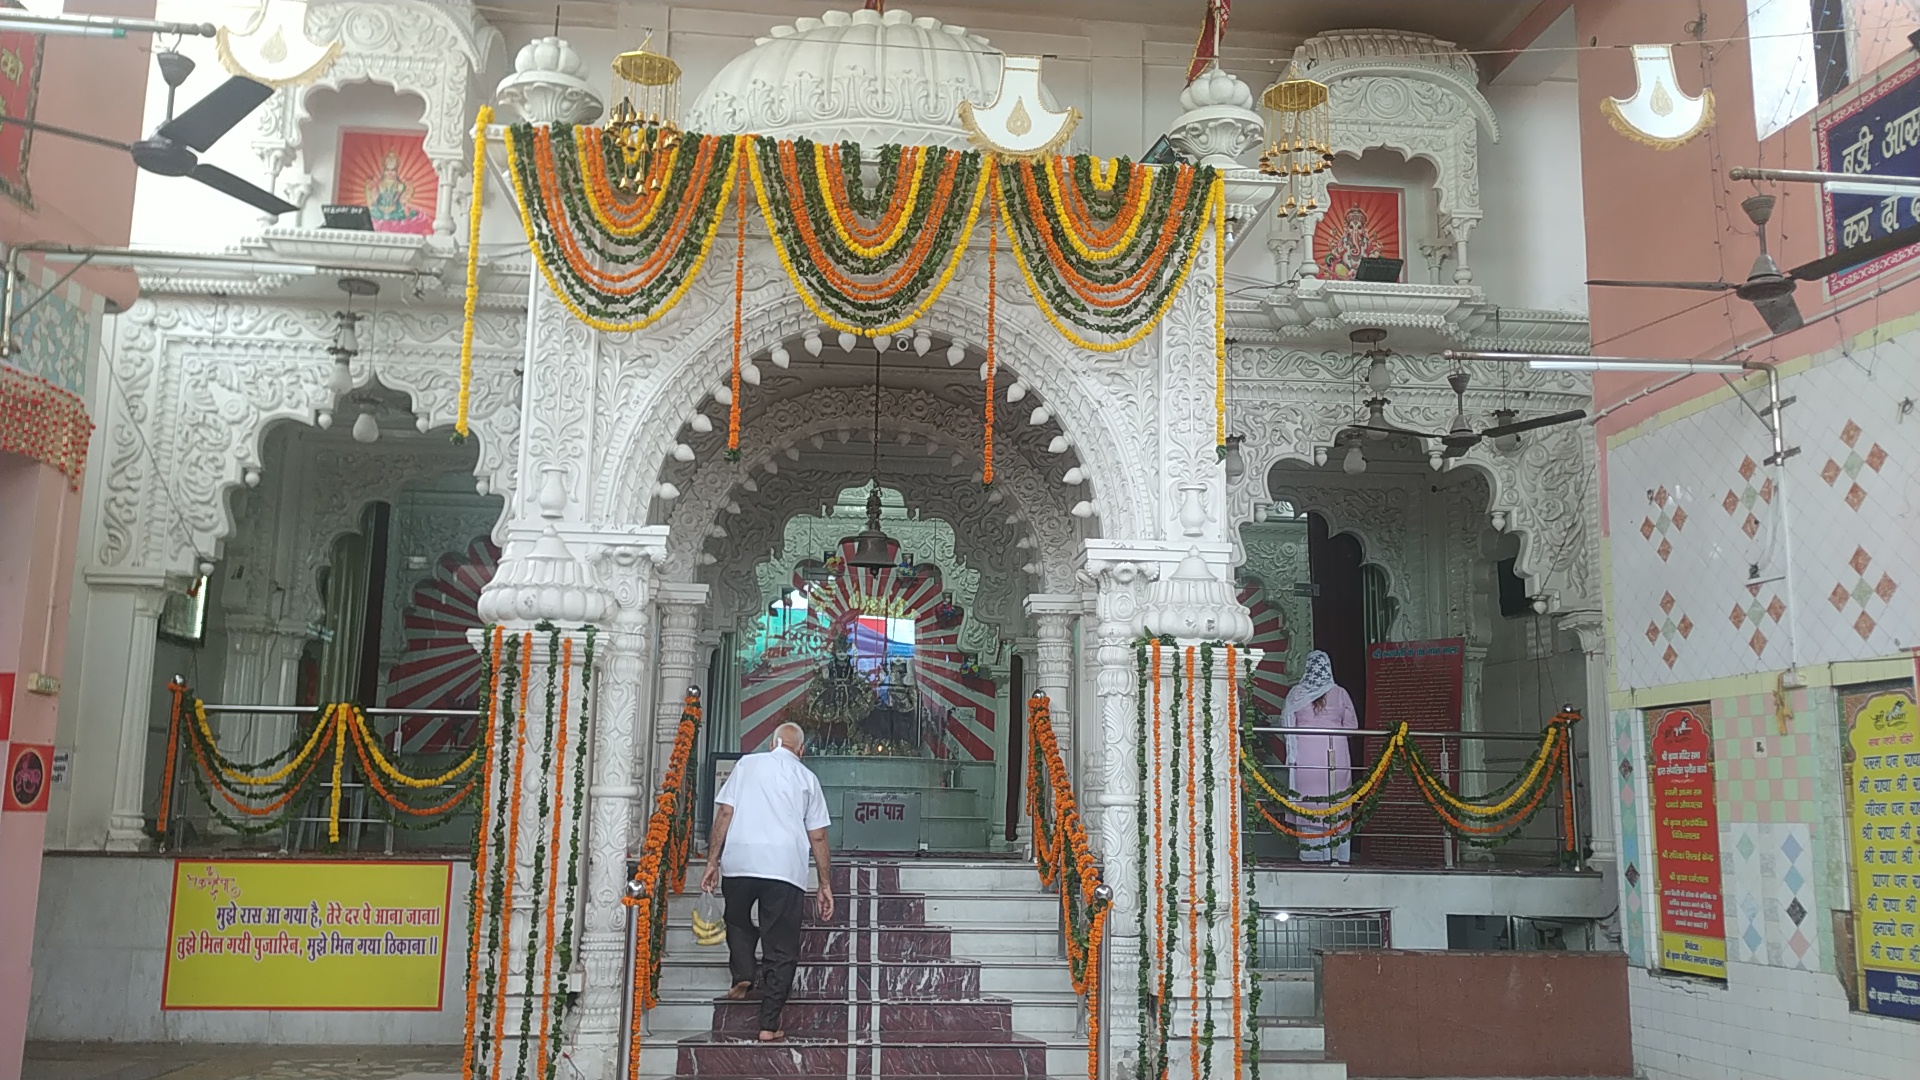 krishna temple decorated with flowers